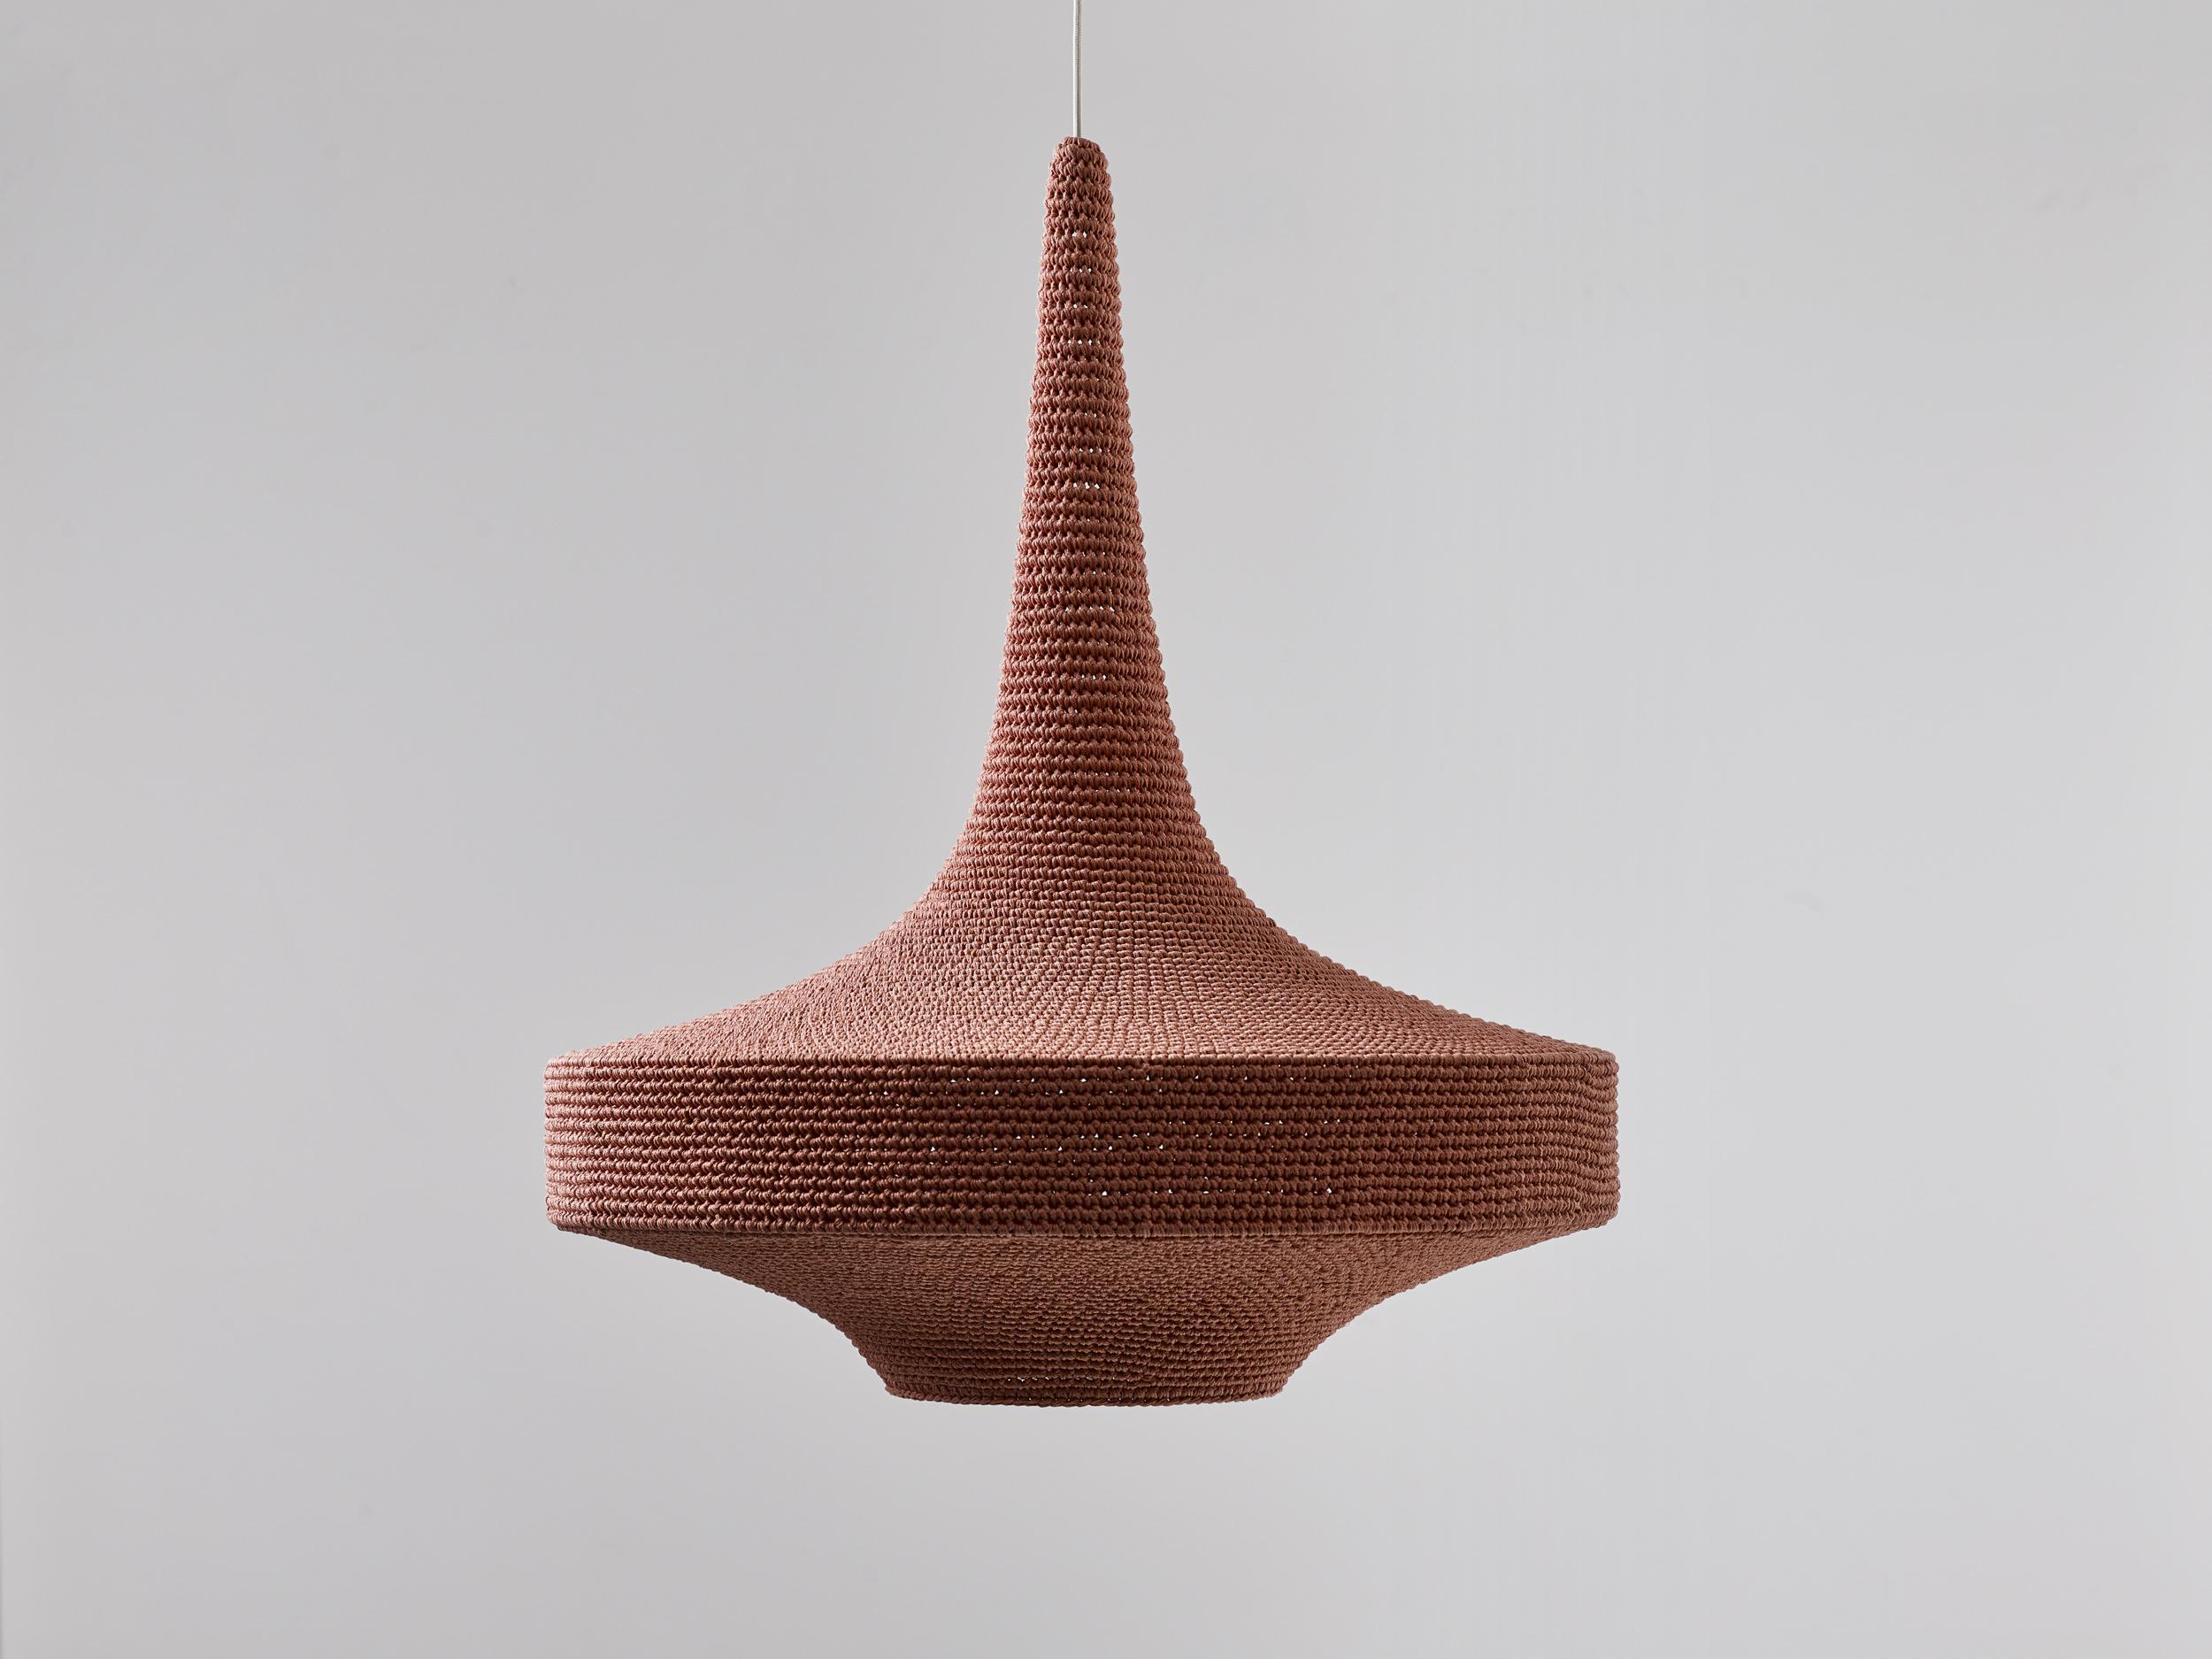 Large Glück pendant lamp by Naomi Paul
Dimensions: D 80 x H 90 cm
Materials: Metal frame, Egyptian cotton cord.
Color: Dusky Pink.
Available in other colors and in 4 sizes: D 50, D 60, D 80, D 100 cm.
Available in plain or two tone color